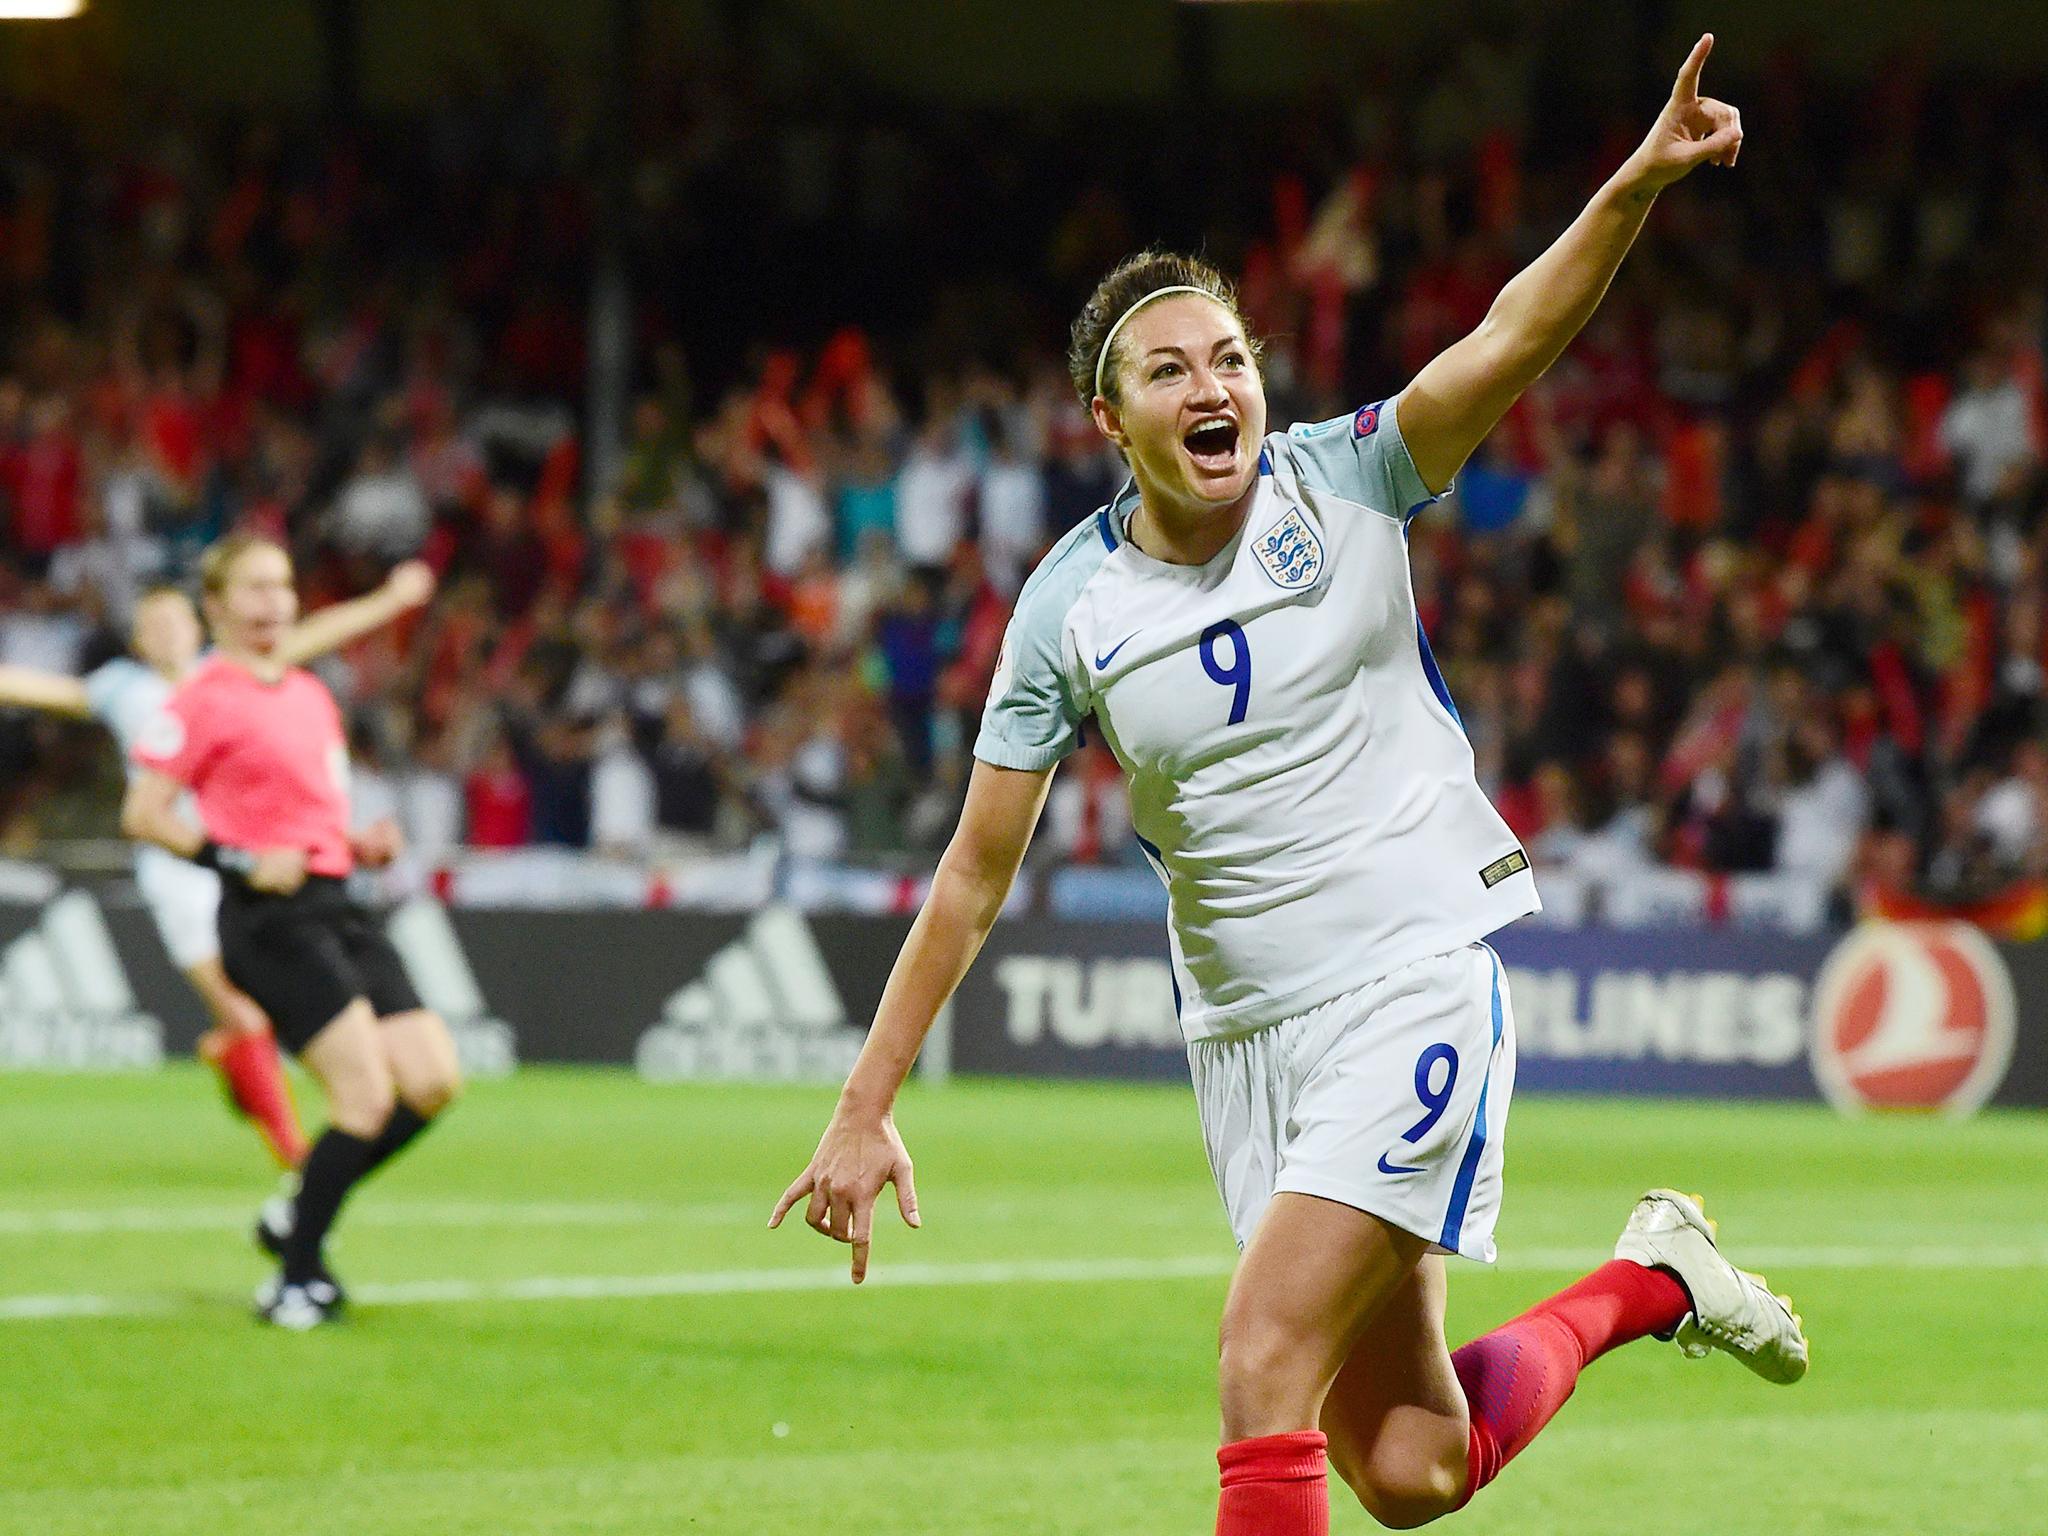 A Jodie Taylor goal against France was enough to take England to the Euro 2017 tournament semi-final, where they lost to hosts and eventual winners the Netherlands. Next summer in France they will take on Scotland, Argentina and Japan in Group D